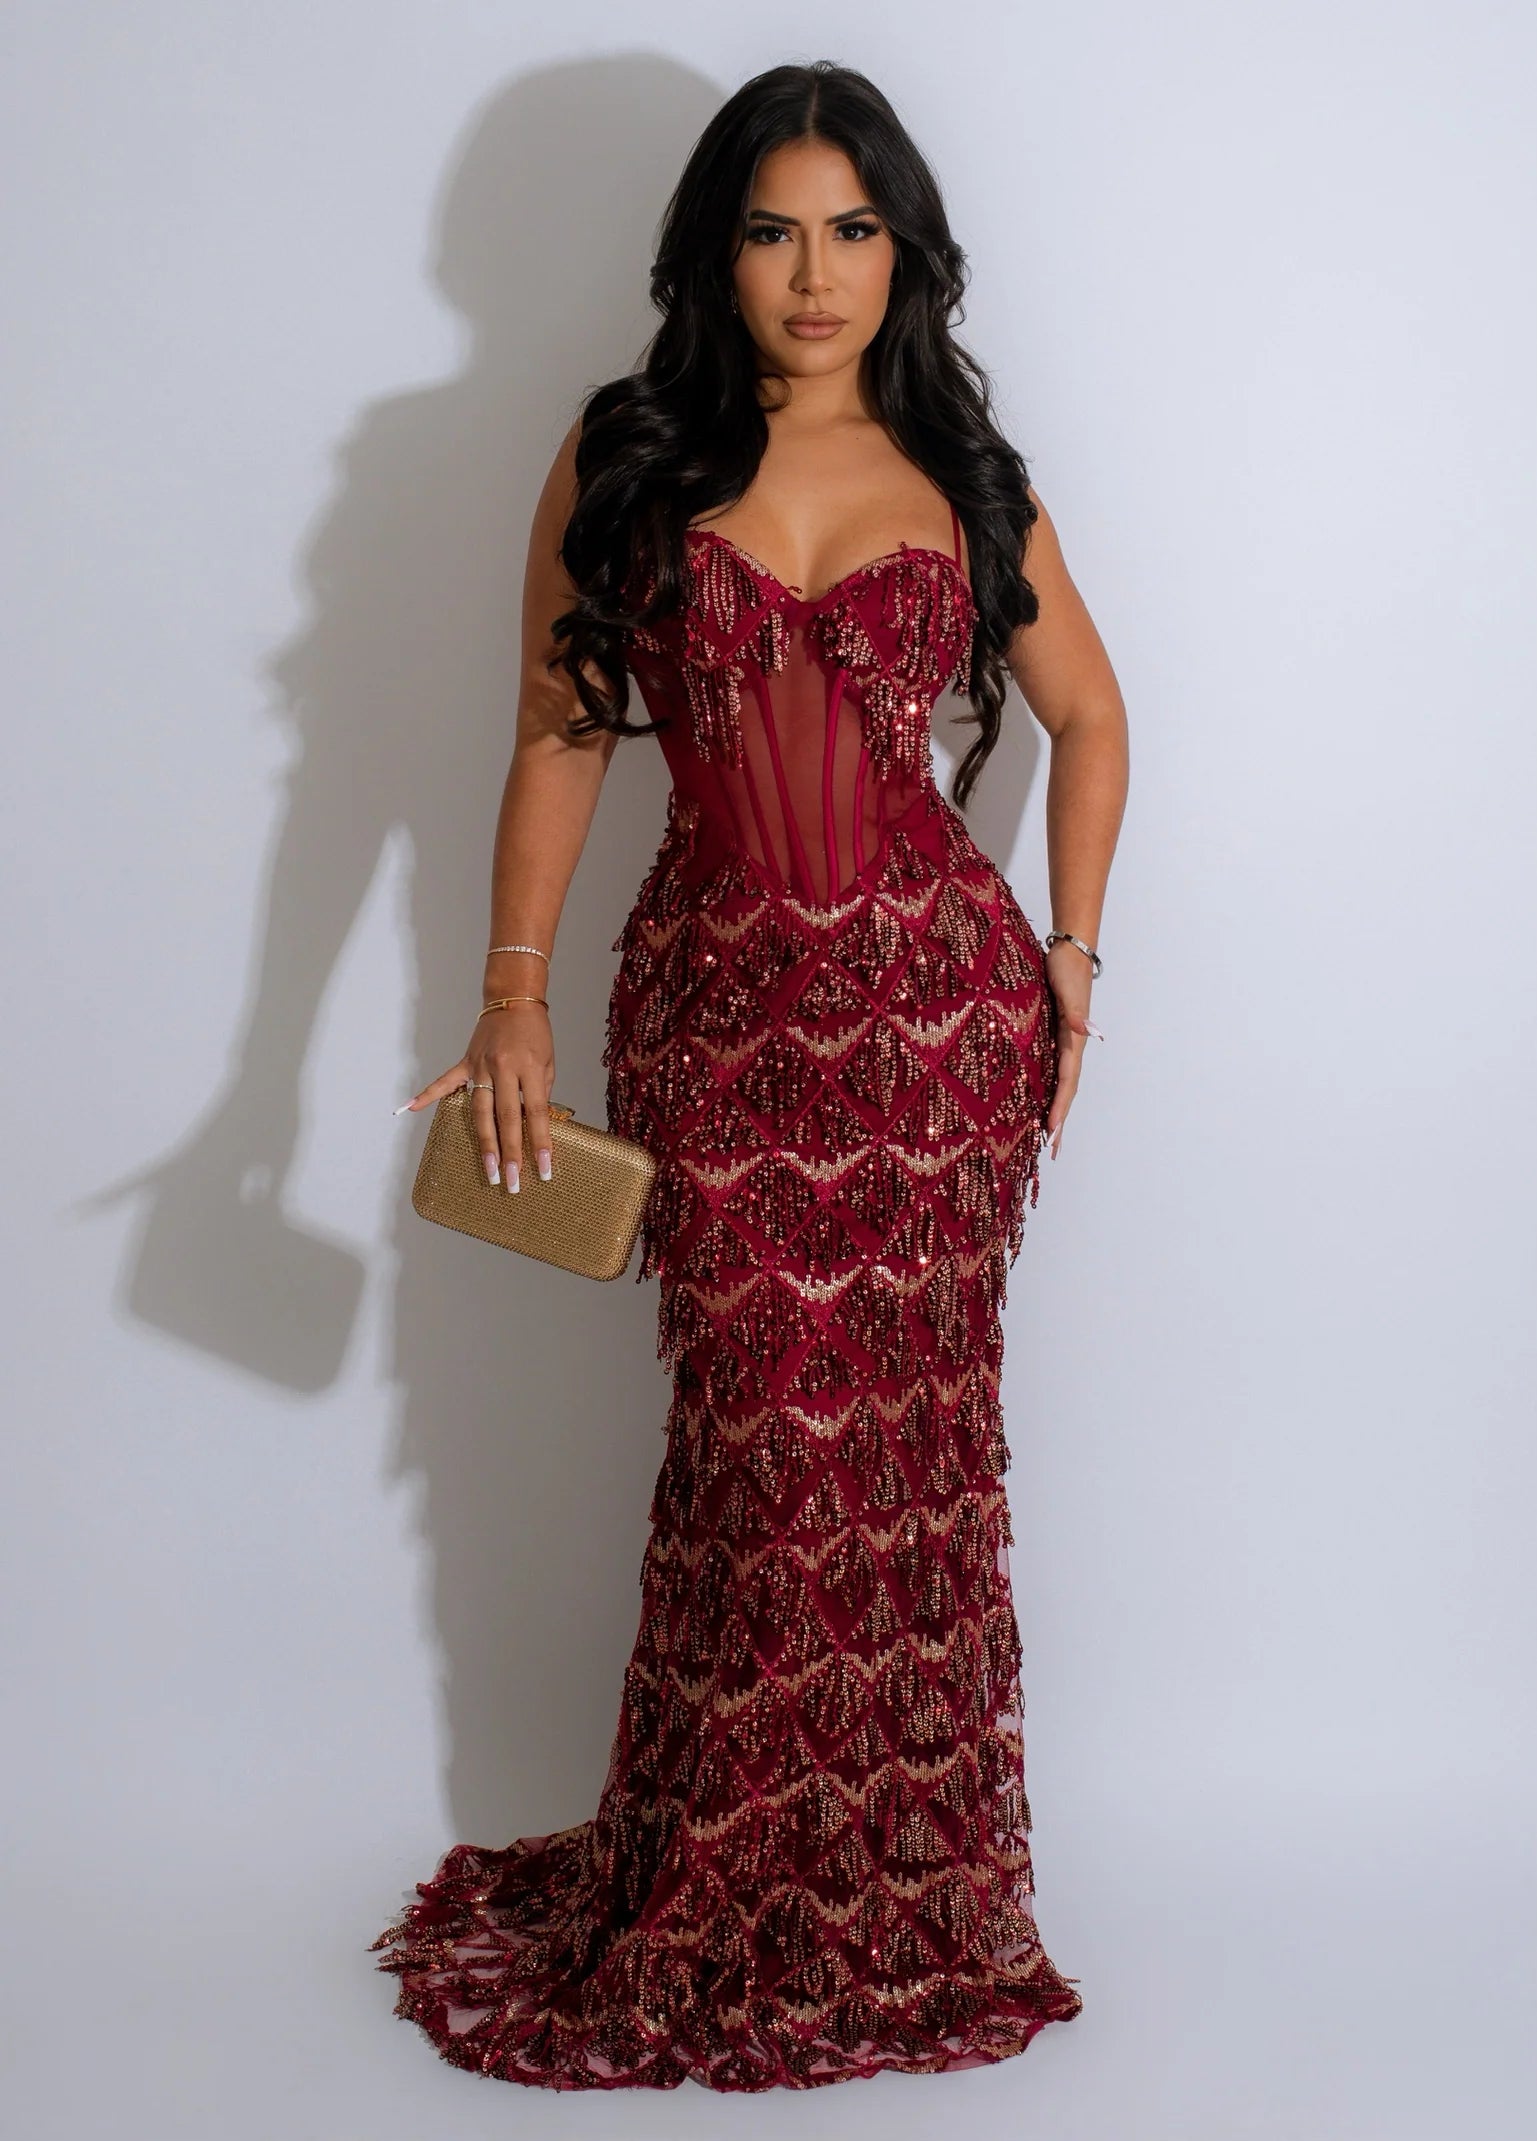 Dubai Nights Sequins Maxi Dress BurgundySimplyDerriModel wearing a SMALL
95% Polyester 5% Spandex
Double Lined 100% Polyester 
Adjustable Straps
 DressDubai Nights Sequins Maxi Dress Burgundy